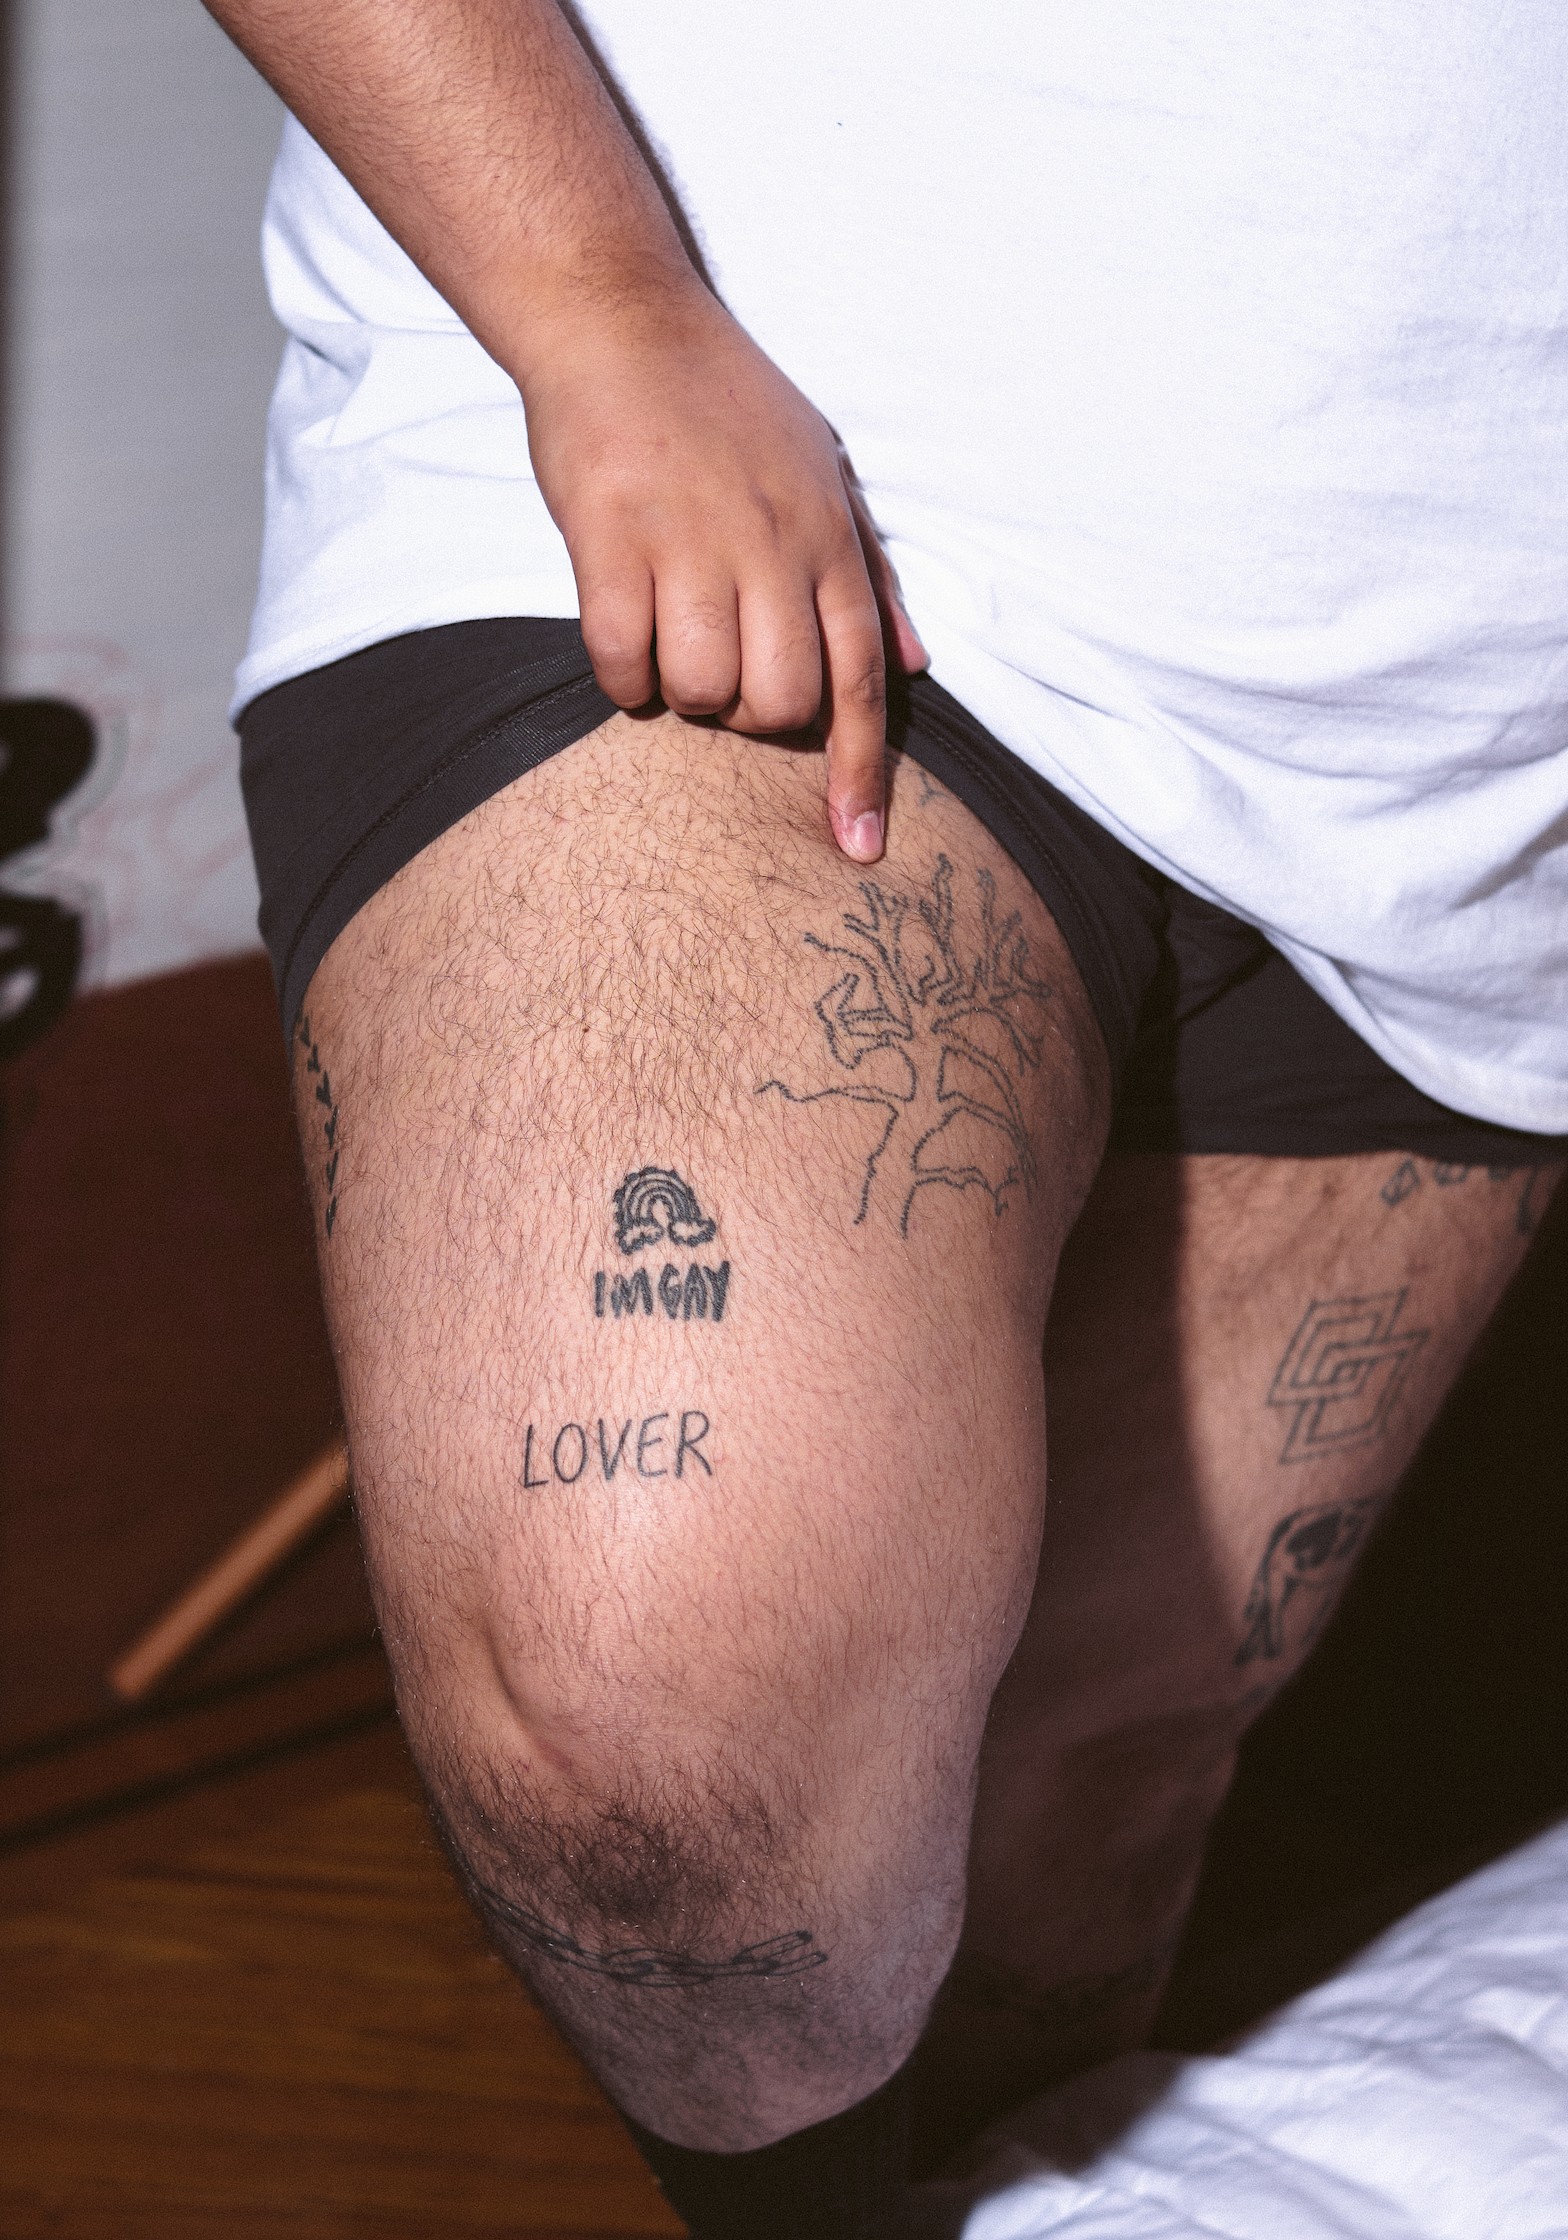 Why Does South Korea Ban Tattooing?